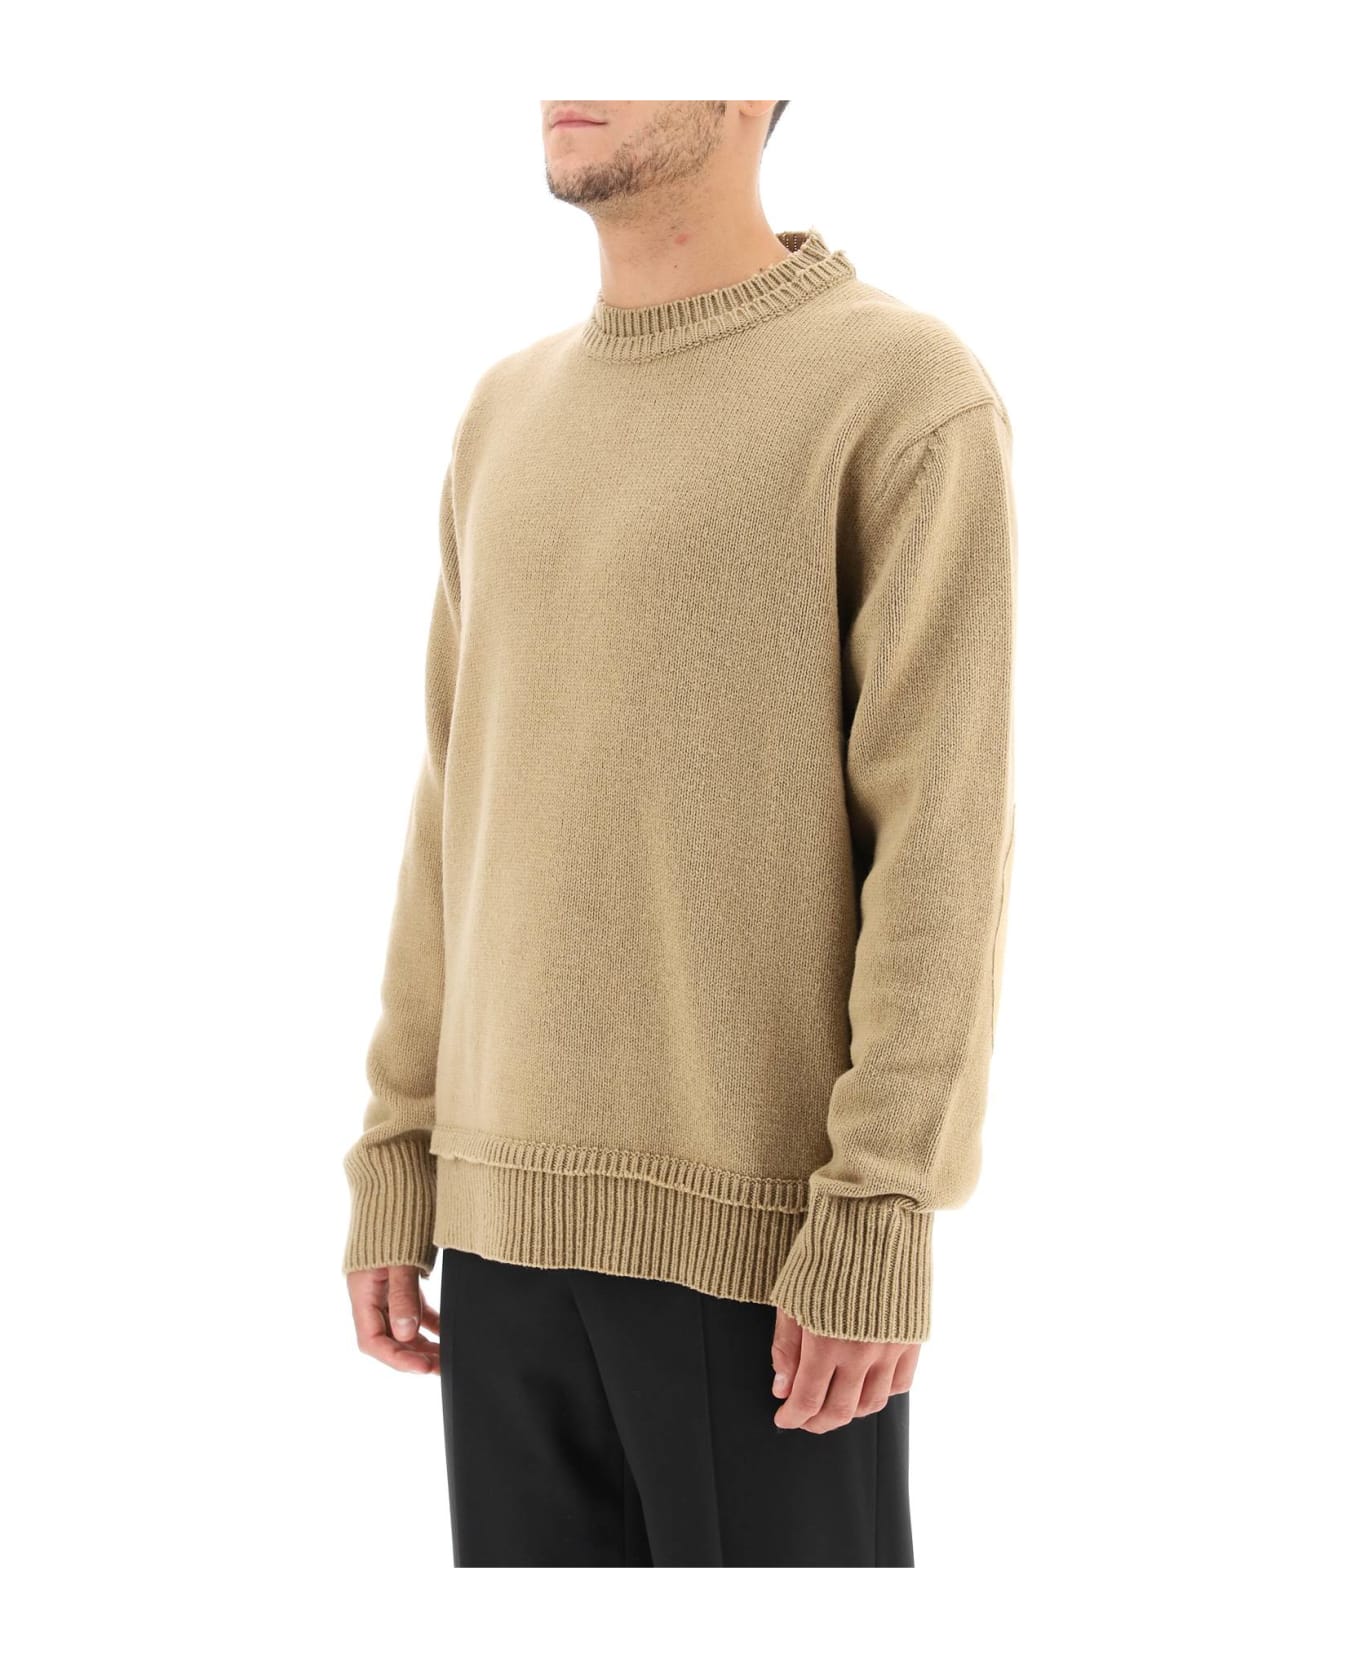 Maison Margiela Crew Neck Sweater With Elbow Patches - Beige